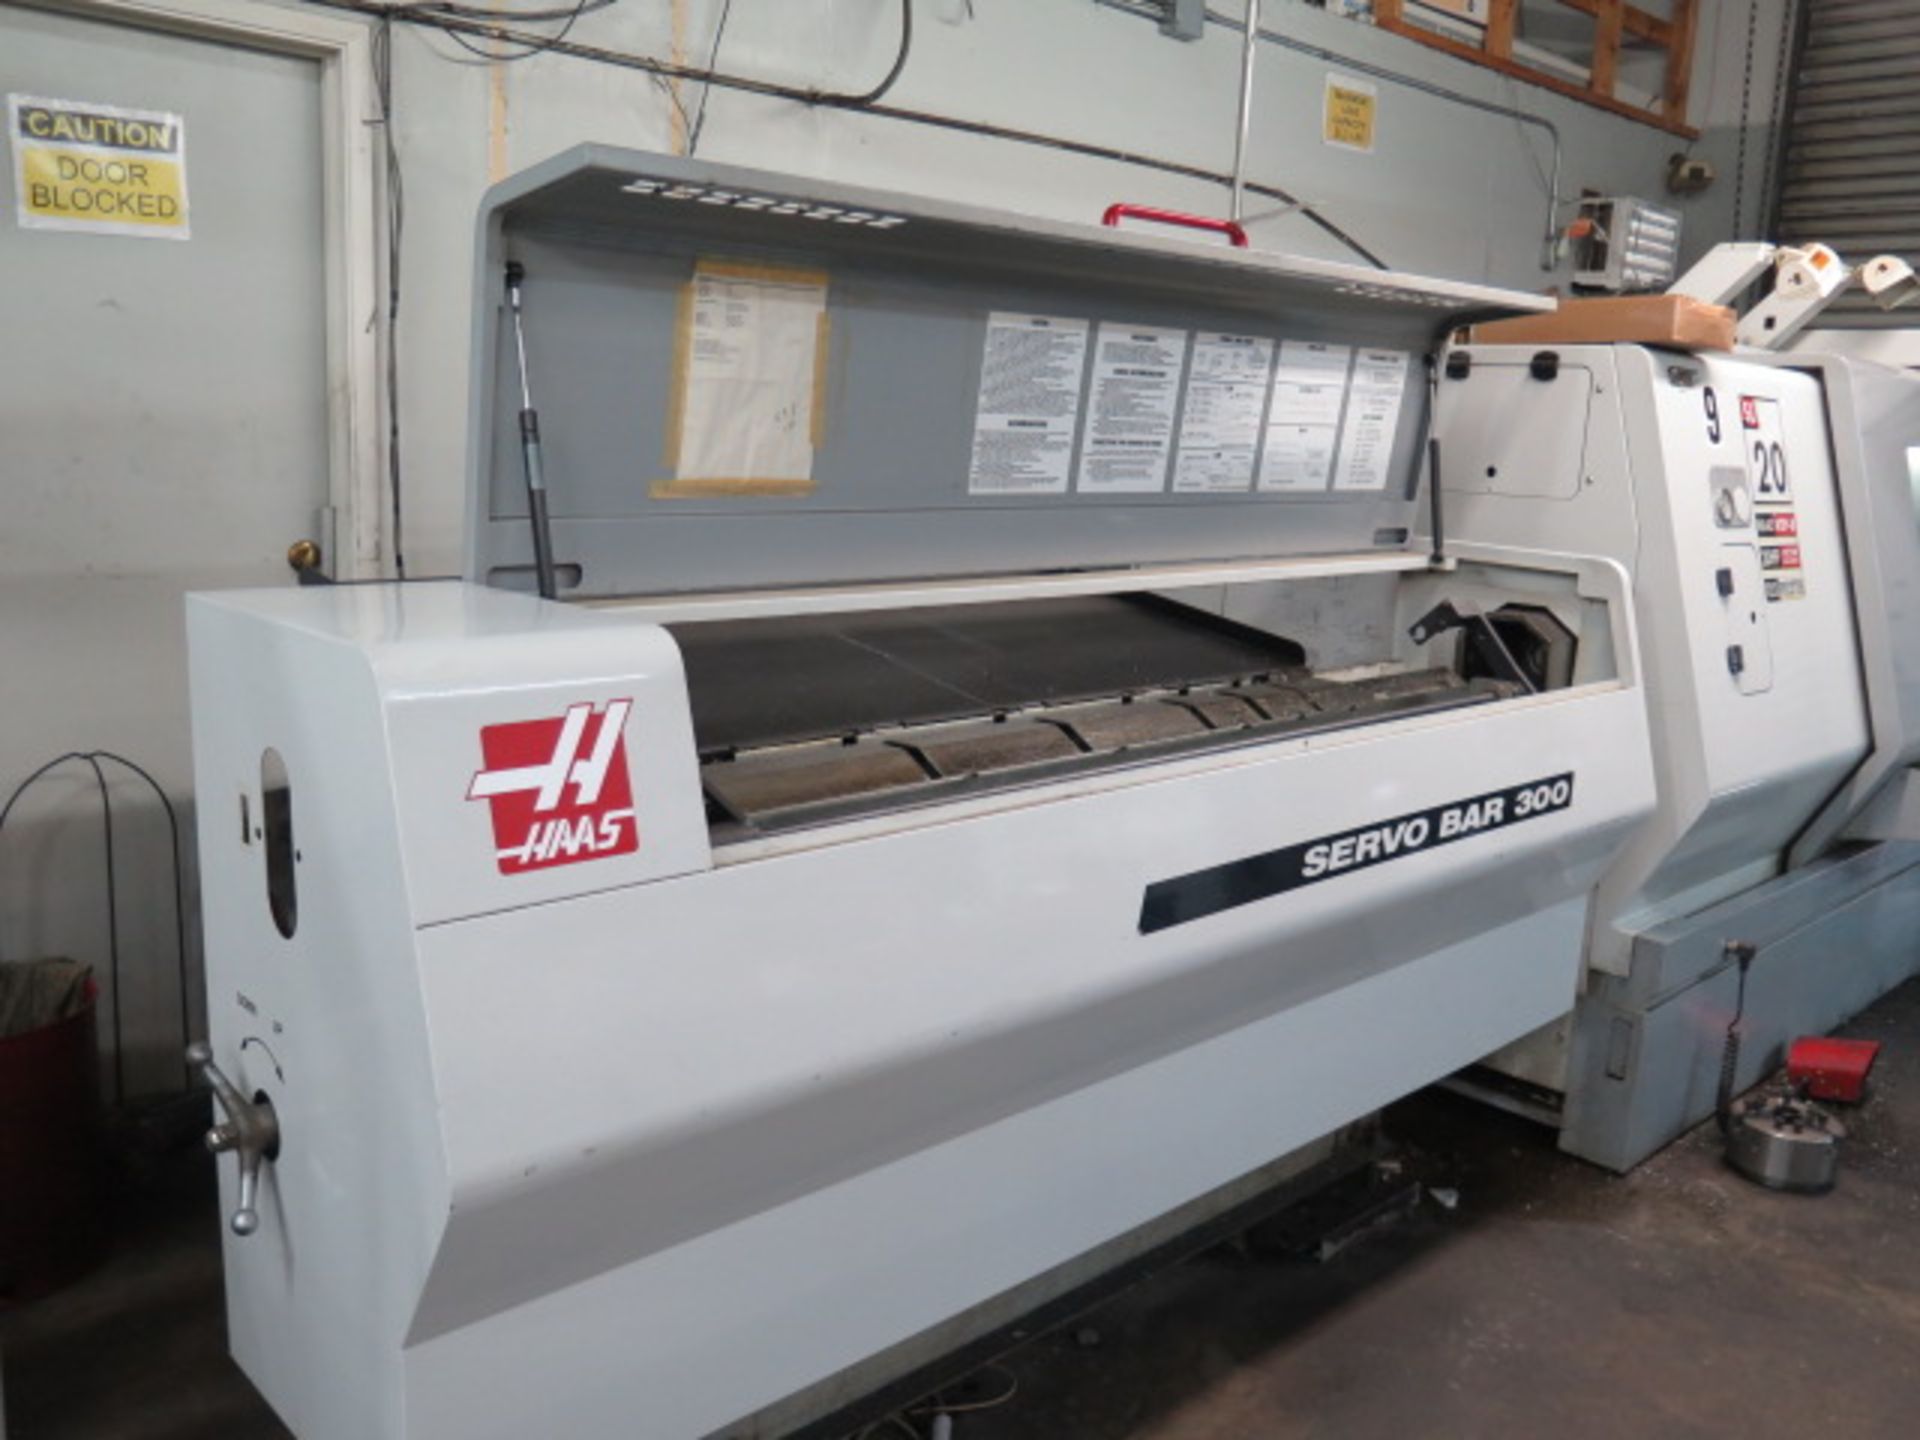 2004 Haas ServoBar 300 Automatic Bar Loader / Feeder s/n 91196 (SOLD AS-IS - NO WARRANTY) - Image 3 of 10